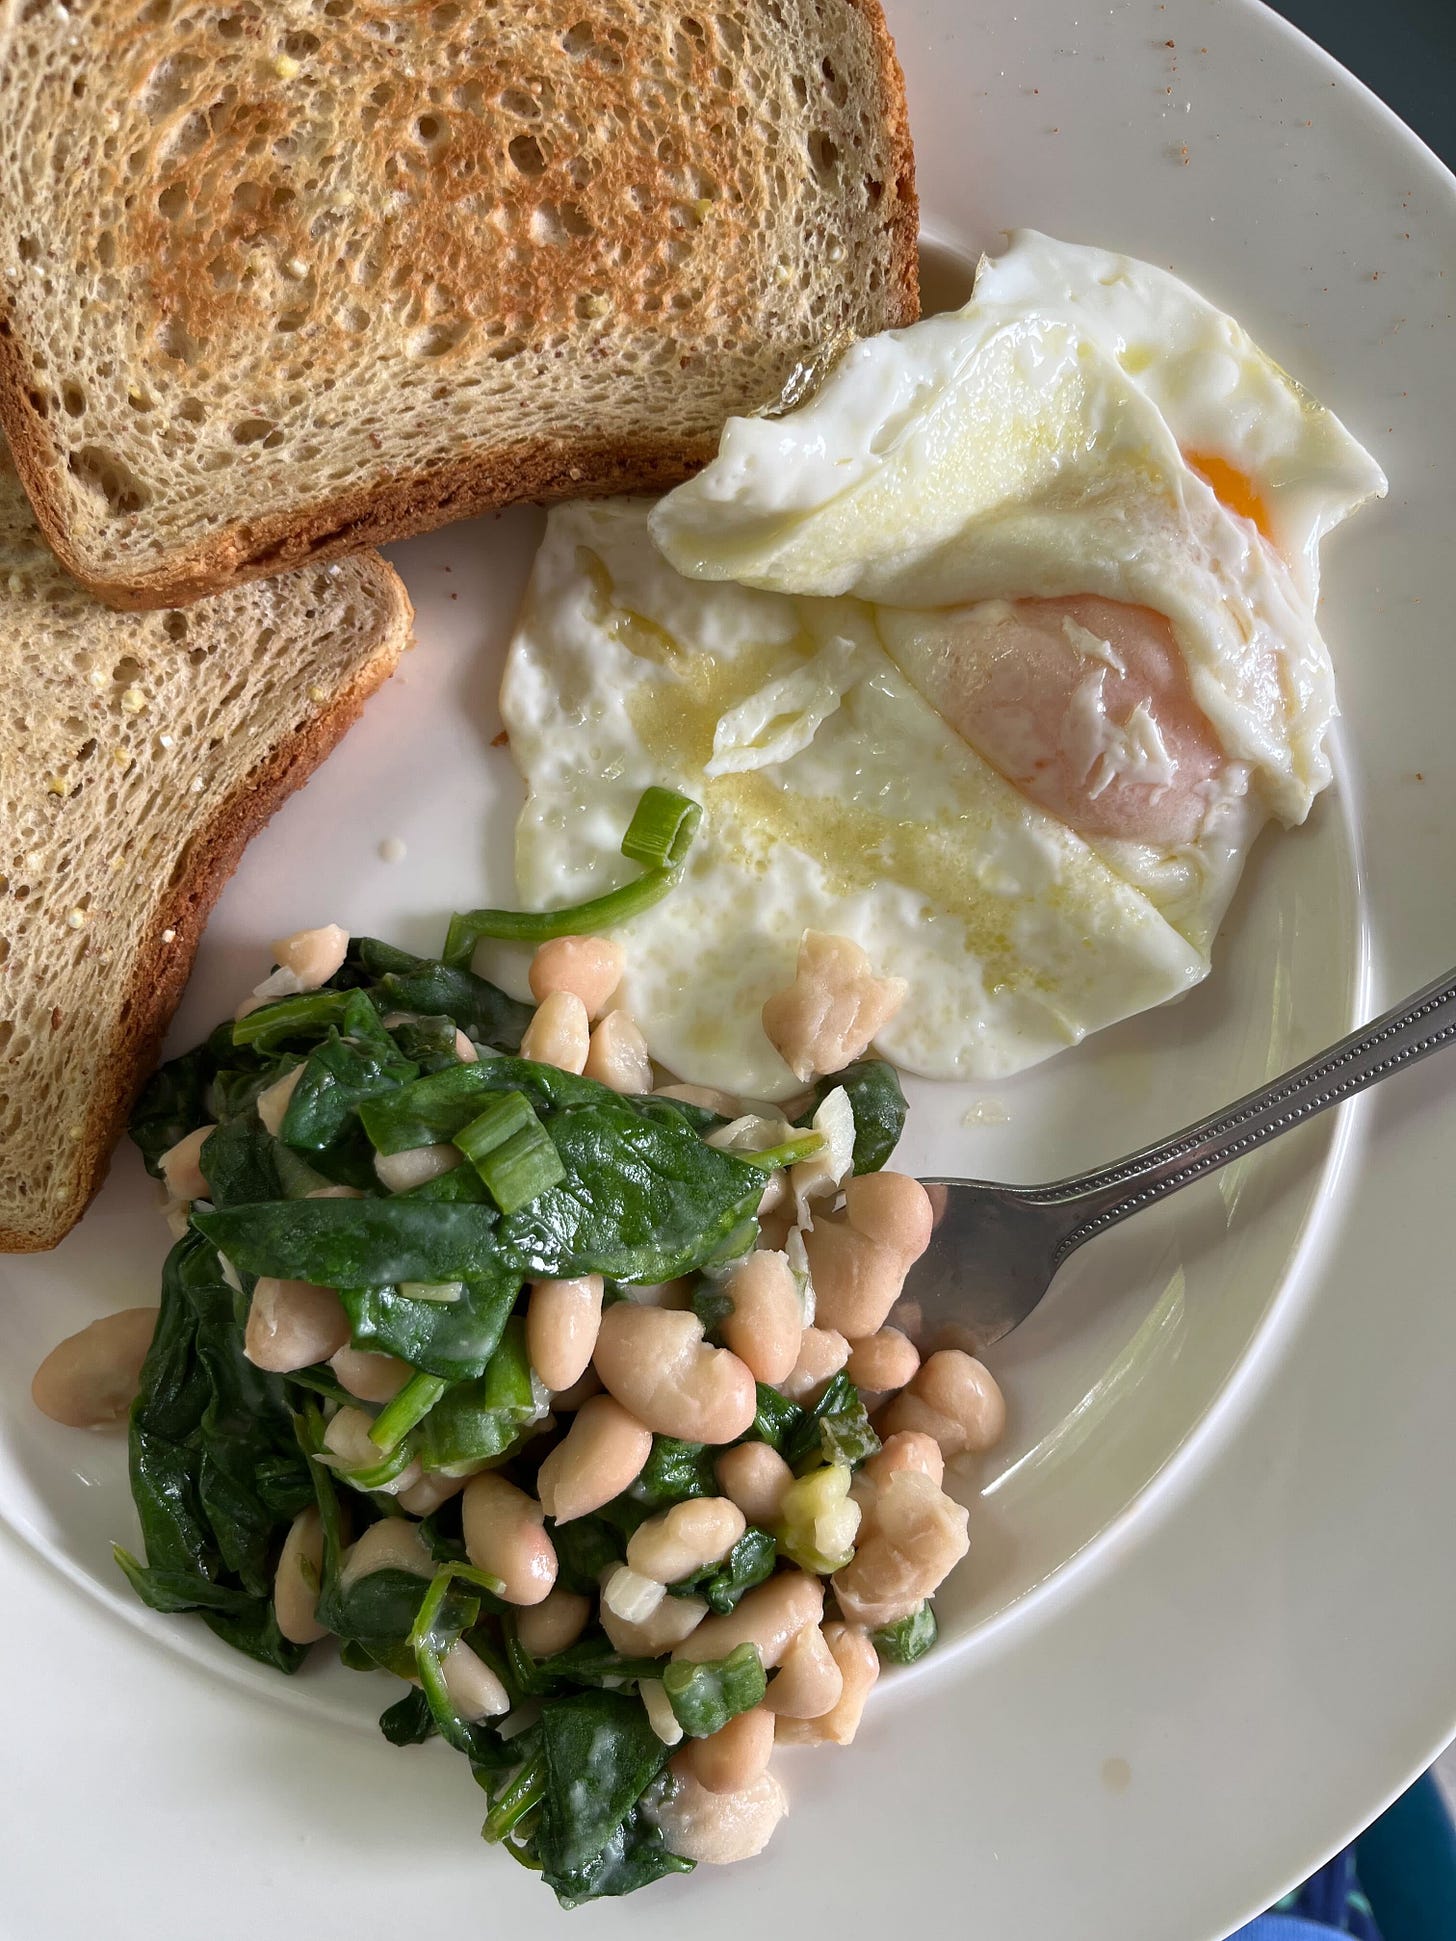 white beans with spinach, an over easy egg, and toast